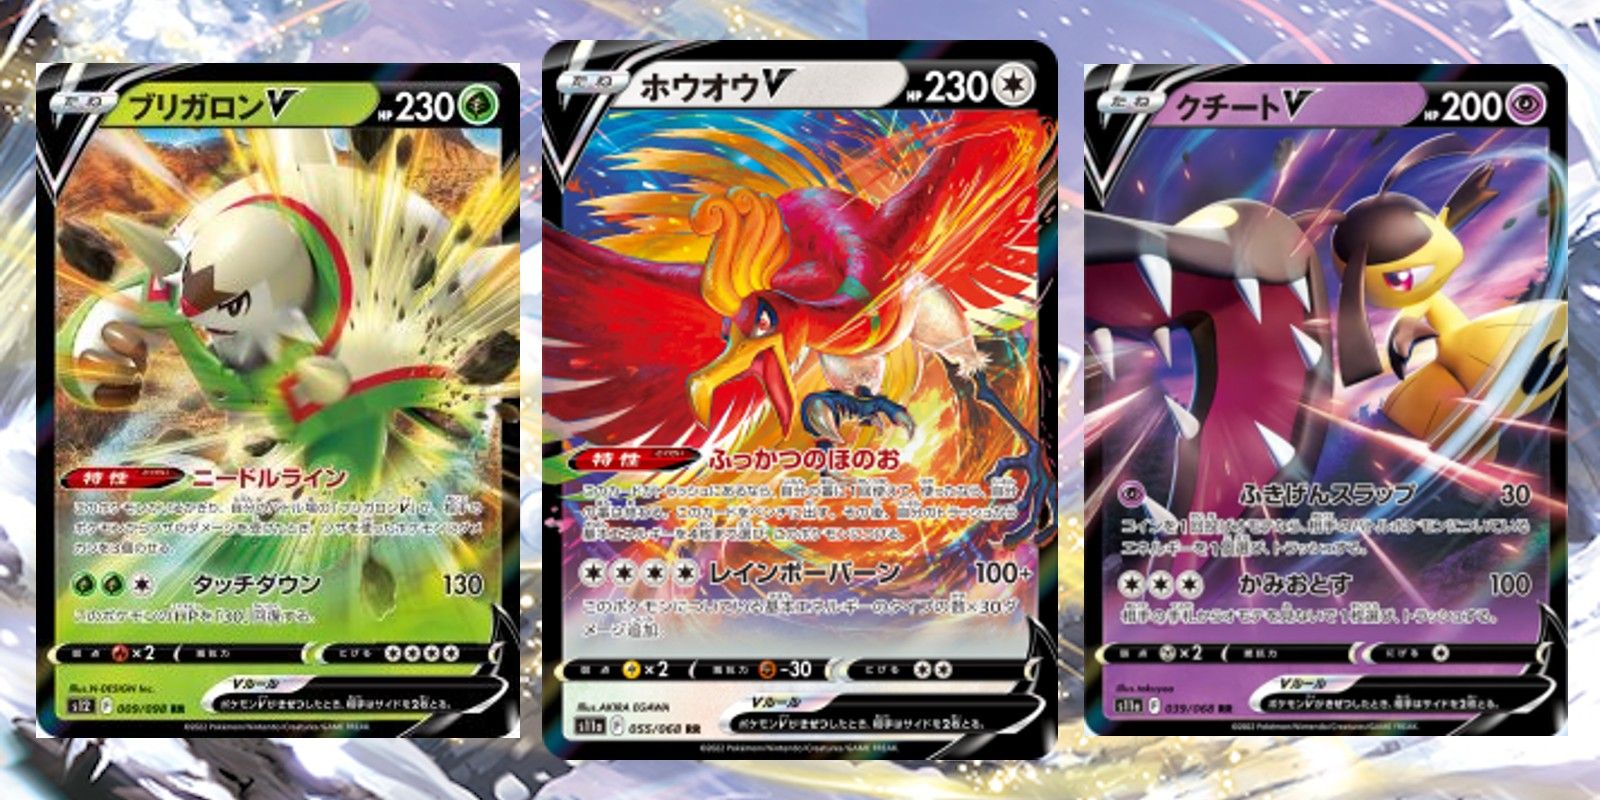 A collage of three different Pokémon V Cards featured in Silver Tempest. From left to right: Chesnaught V, Ho-Oh V, and Mawile V.